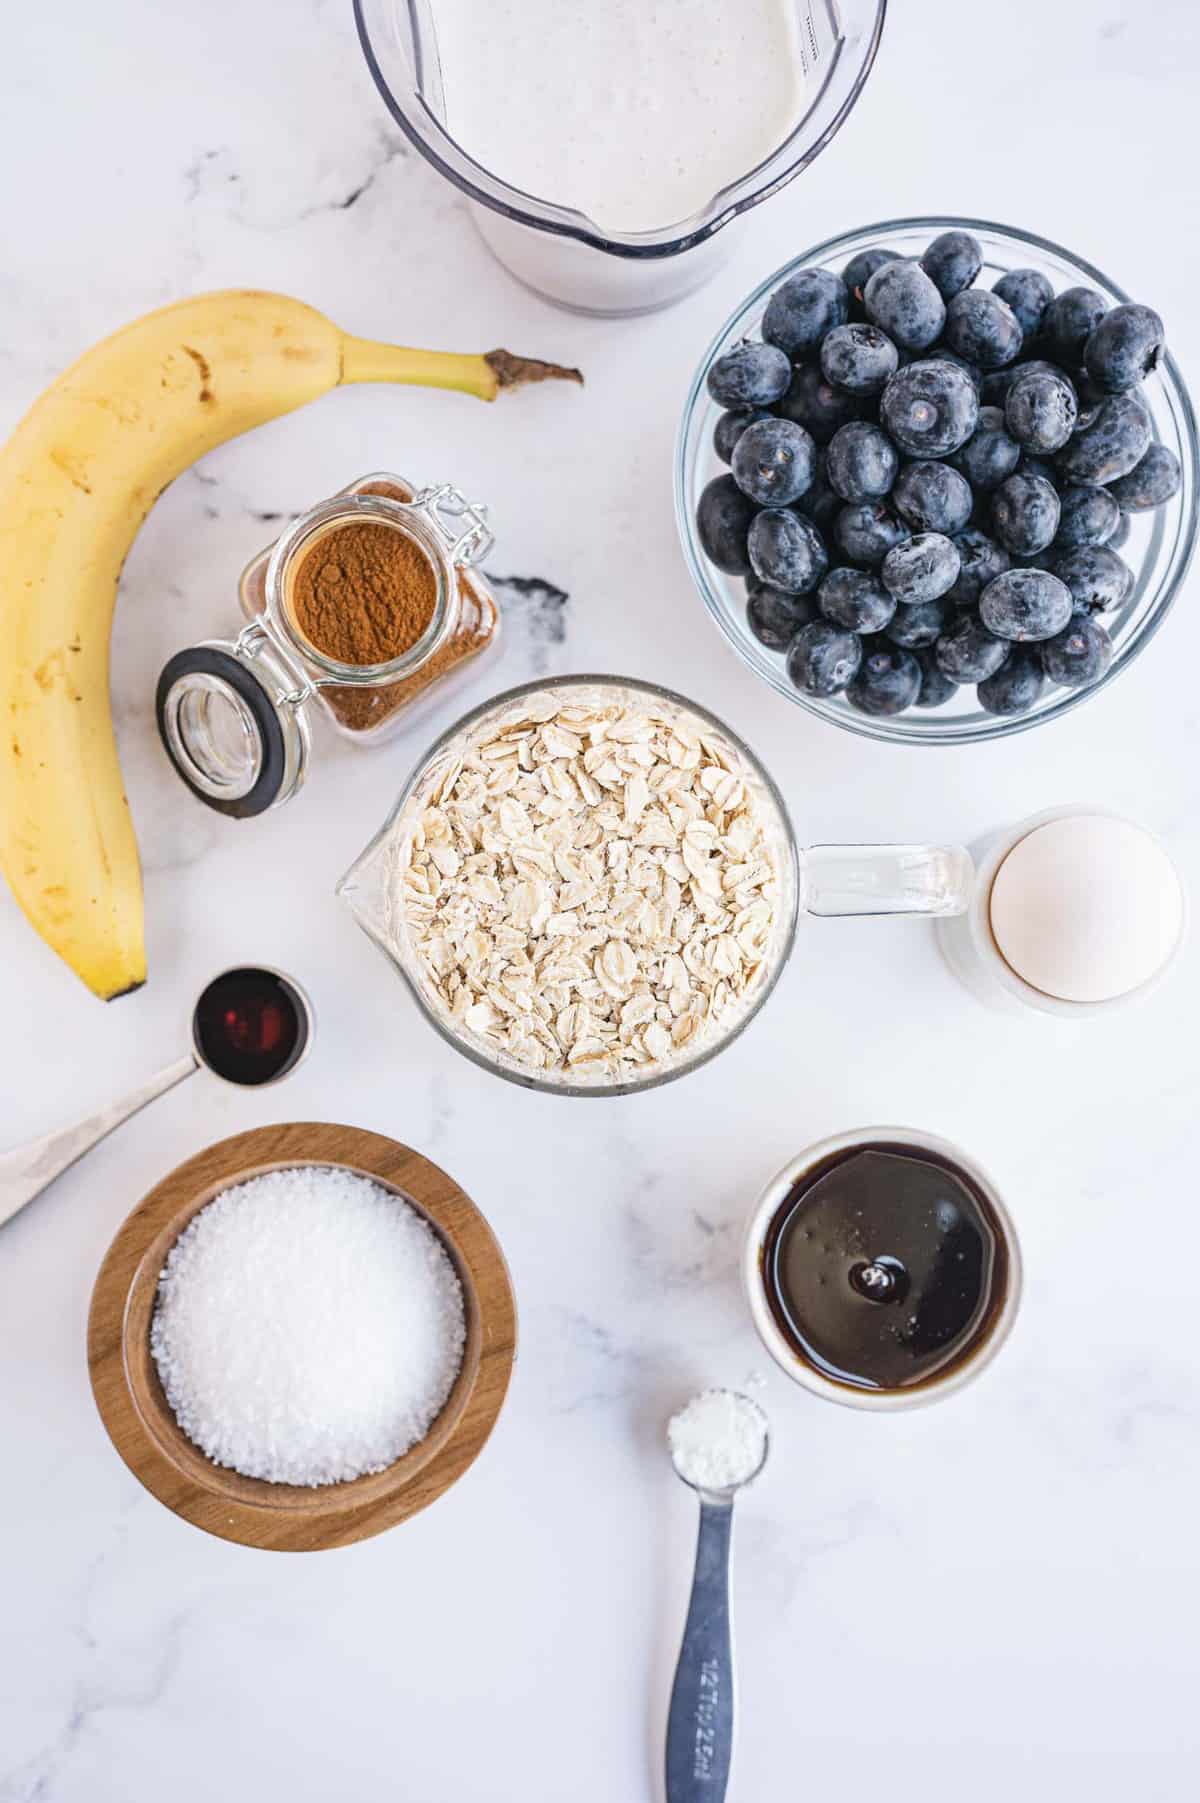 Ingredients needed for recipe, including blueberries and a banana.